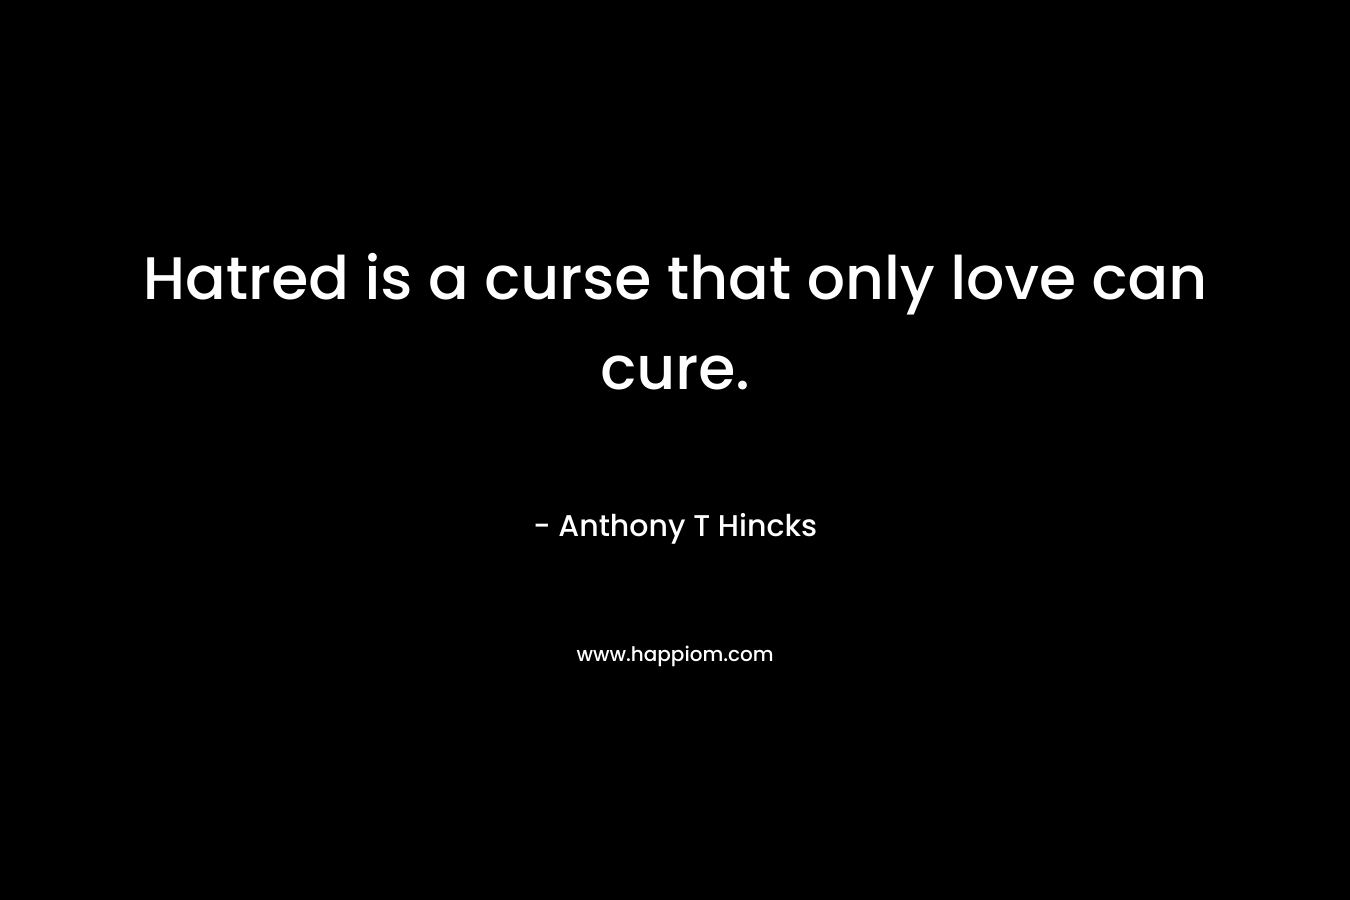 Hatred is a curse that only love can cure. – Anthony T Hincks